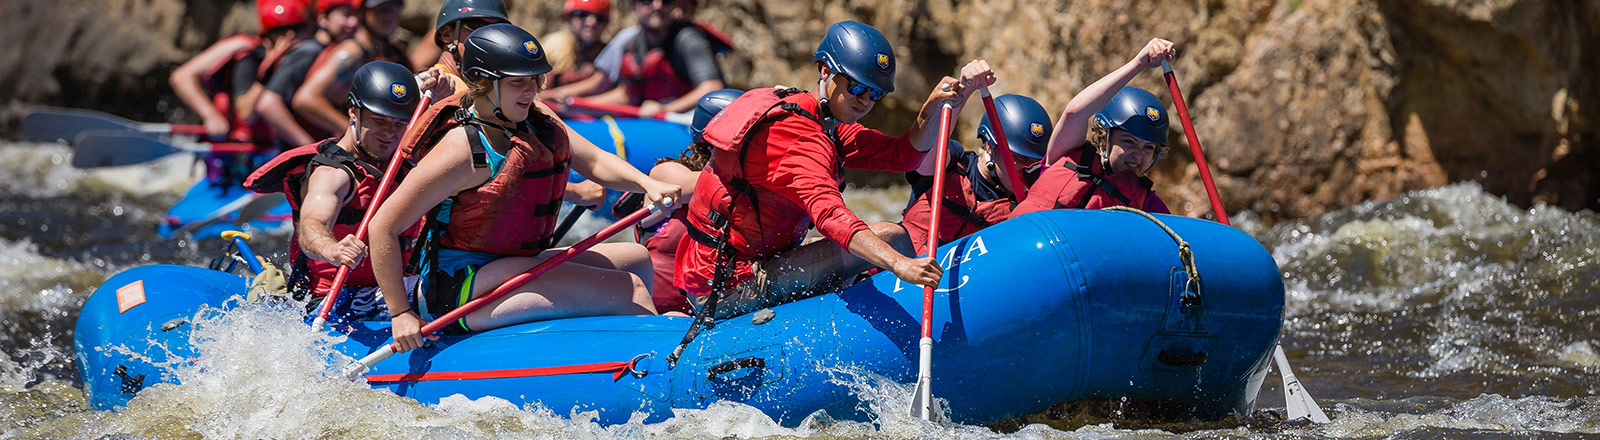 Outdoor Pursuits group white water rafting